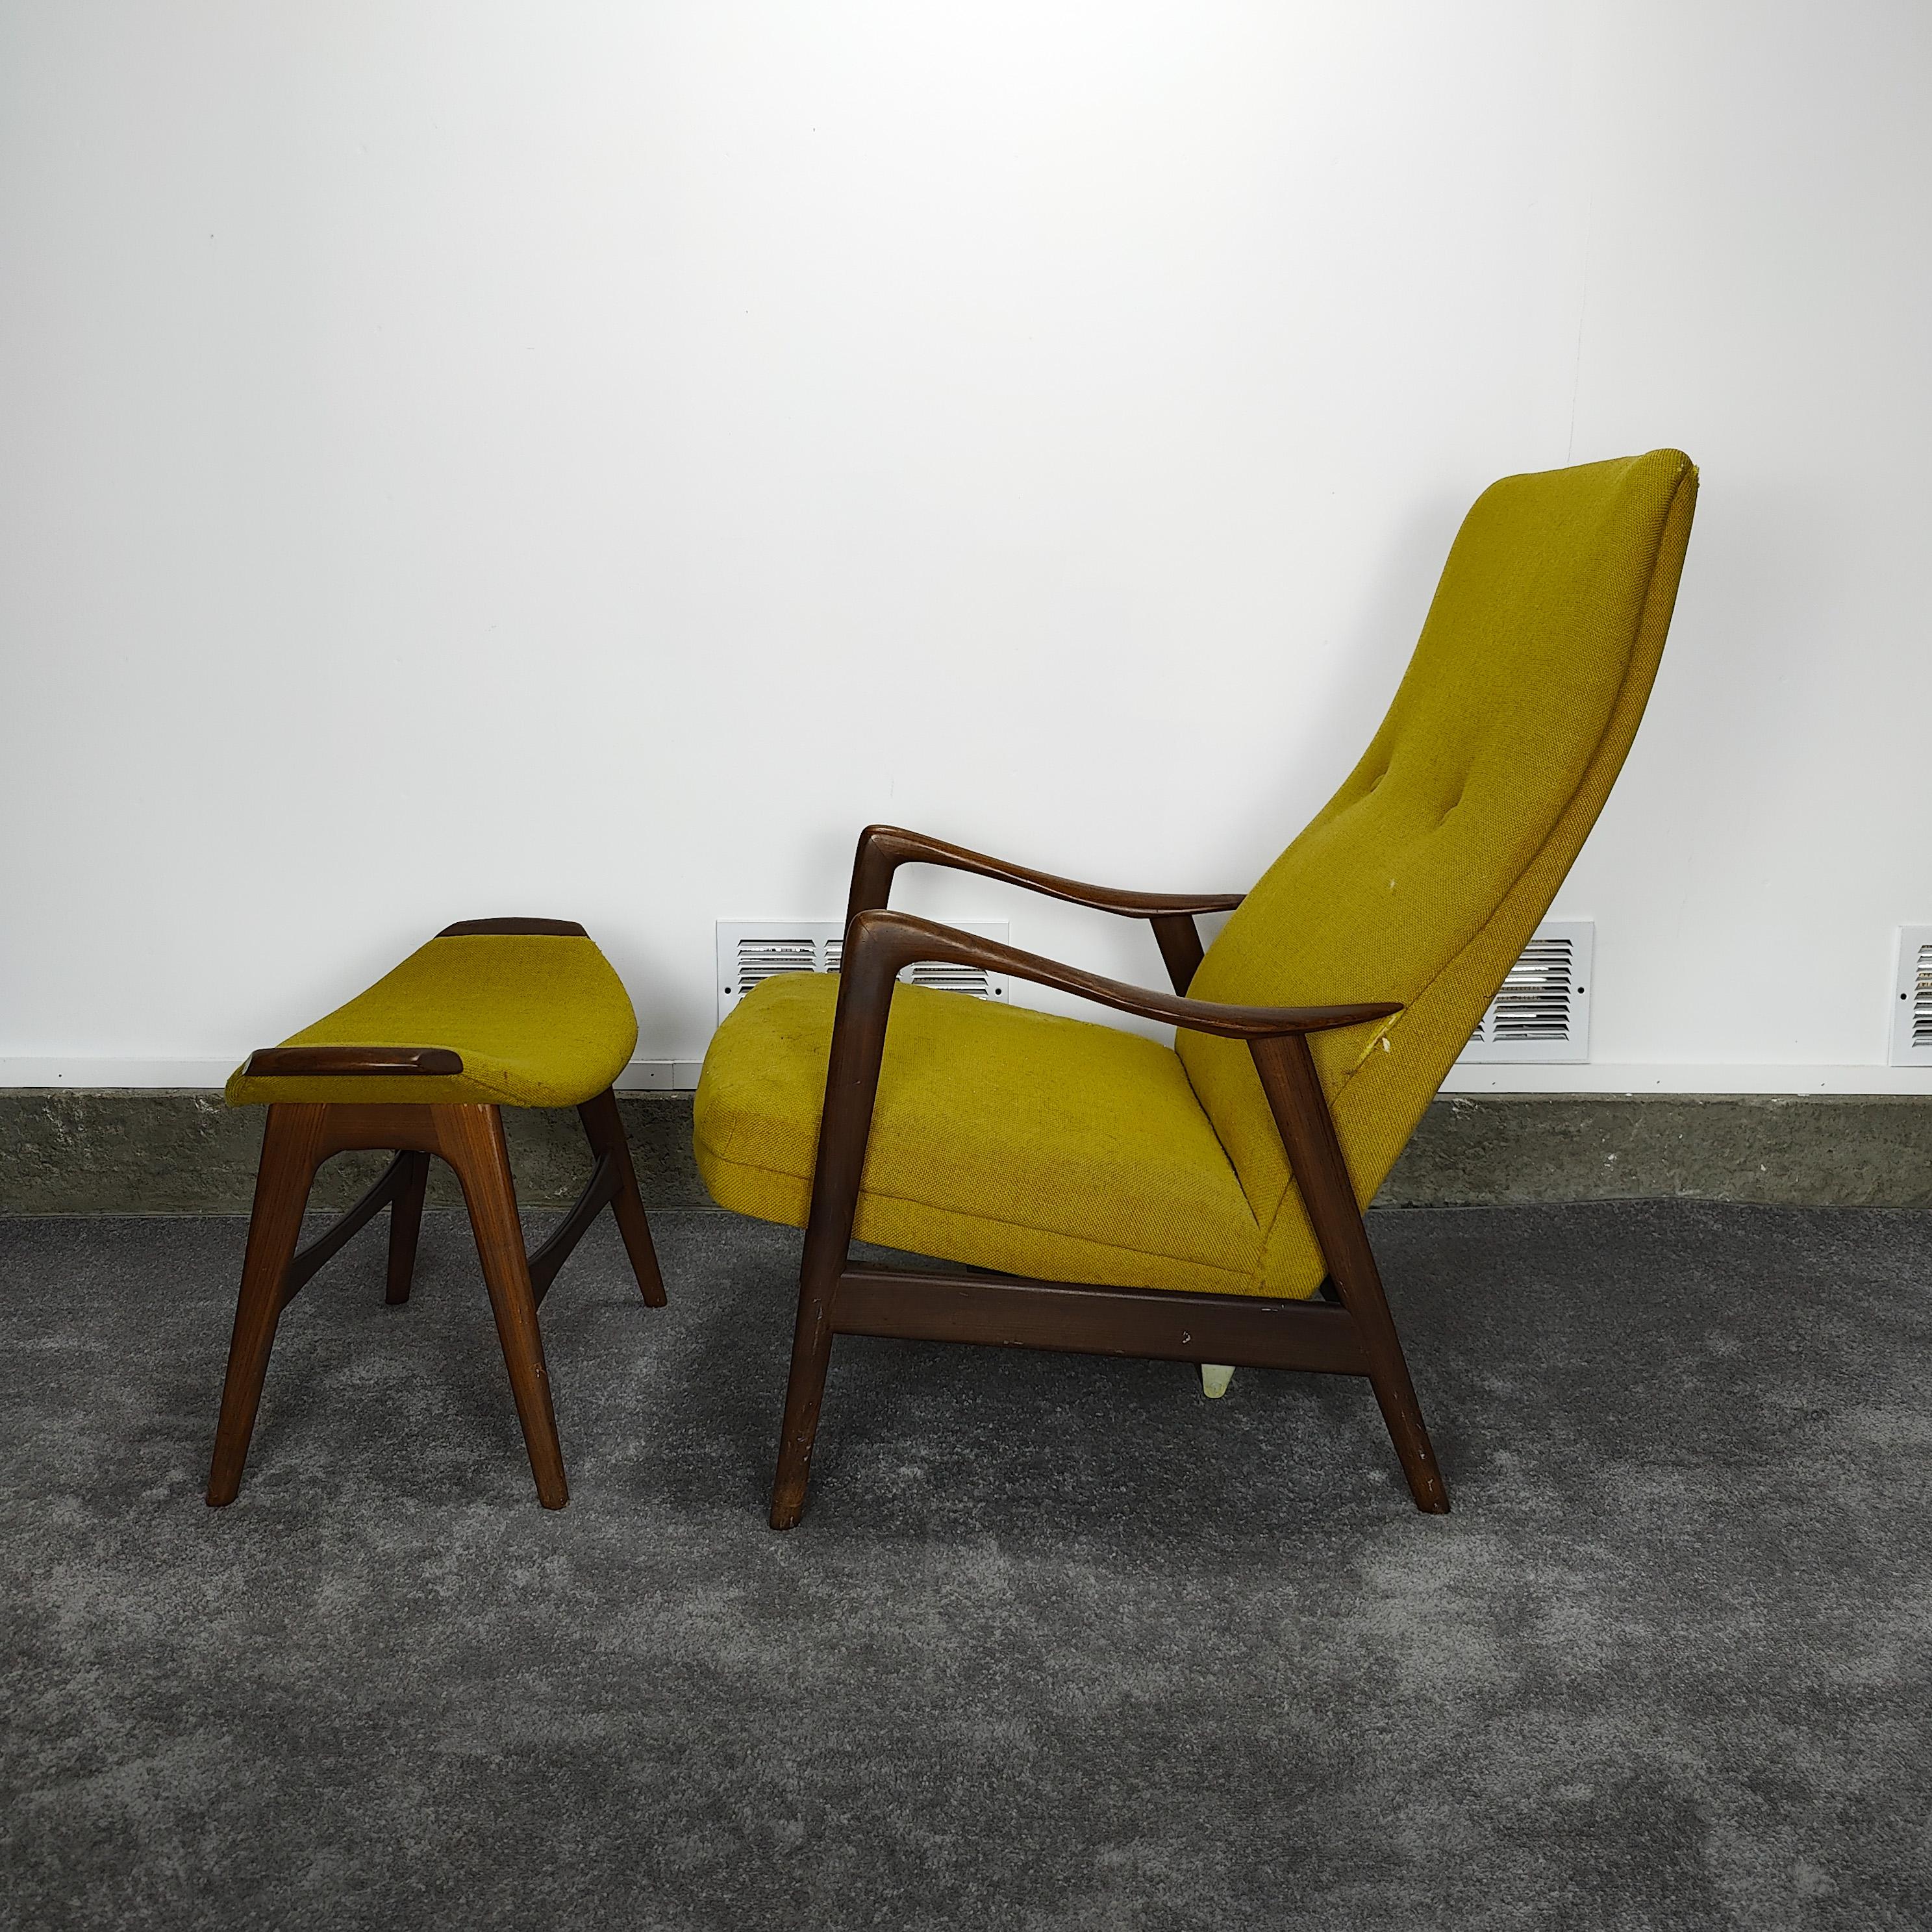 Now available is an amazing midcentury chair, true to Norwegian origins. This high back chair and ottoman in original condition and is reflected accordingly. The chair features a tilt mechanism that allows the seating position to be adjusted to your